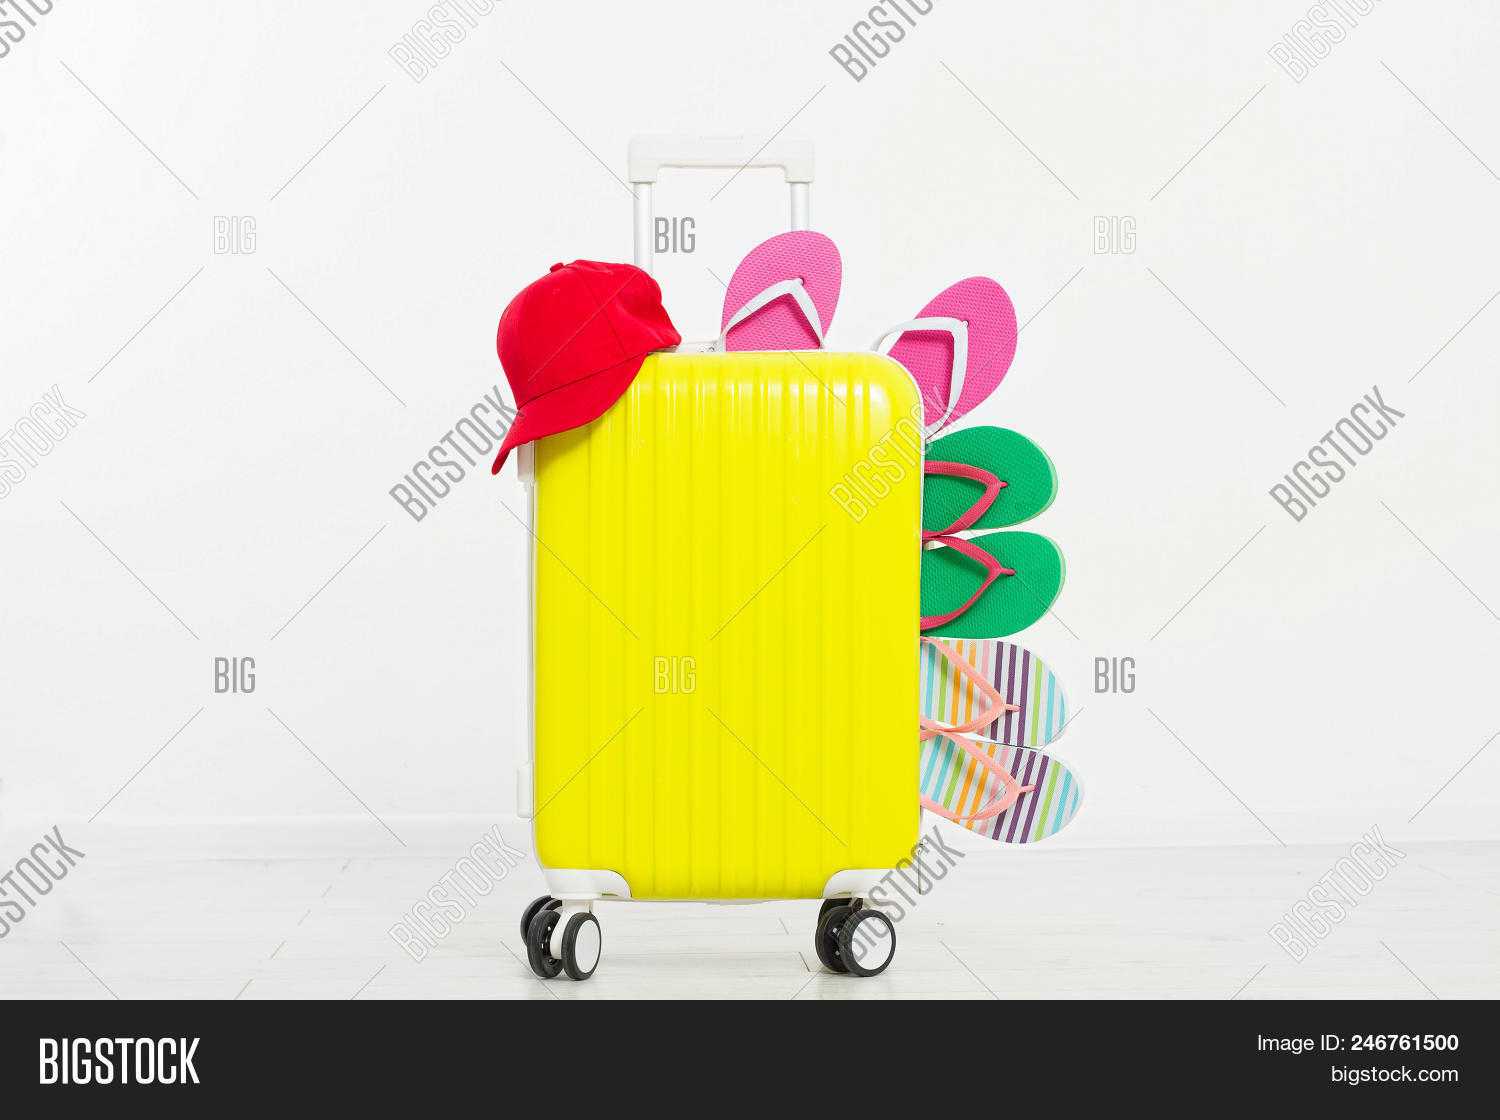 Suitcase Isolated On Image & Photo (Free Trial) | Bigstock In Blank Suitcase Template